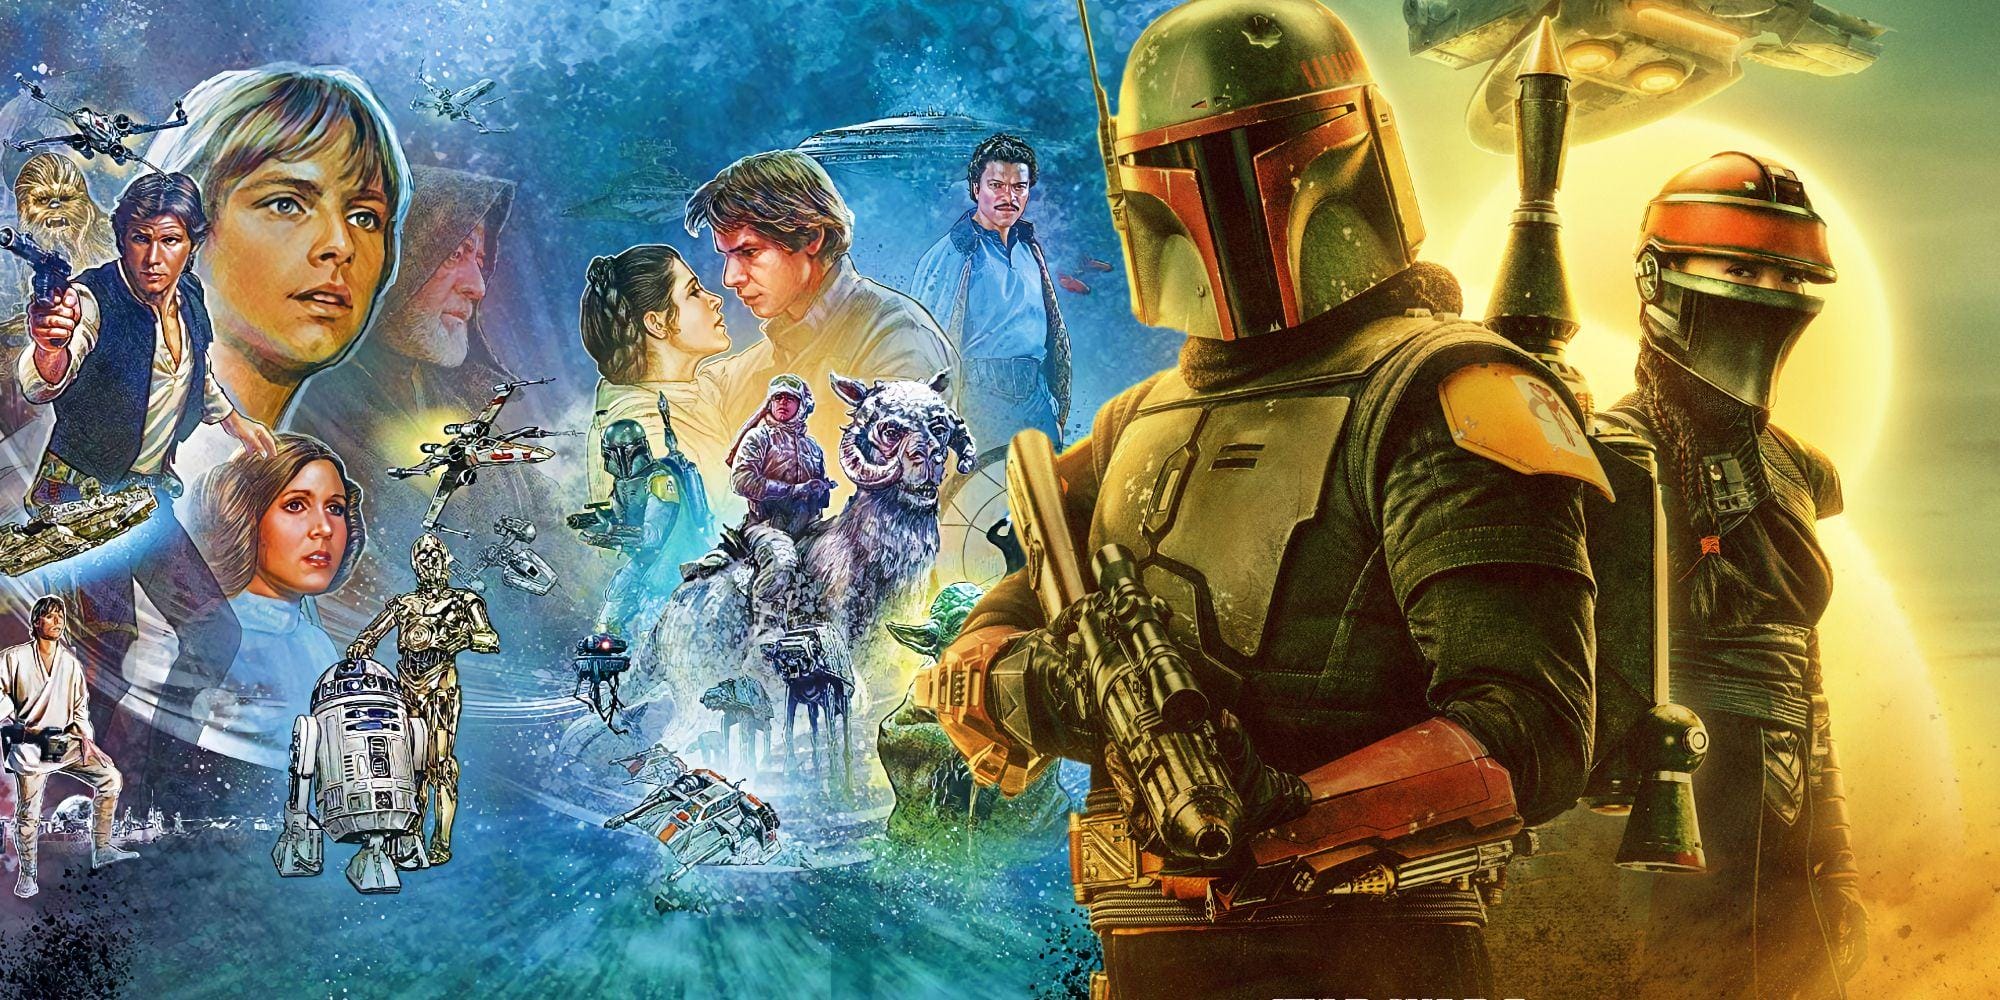 A mural for Star Wars next to the poster for The Book of Boba Fett